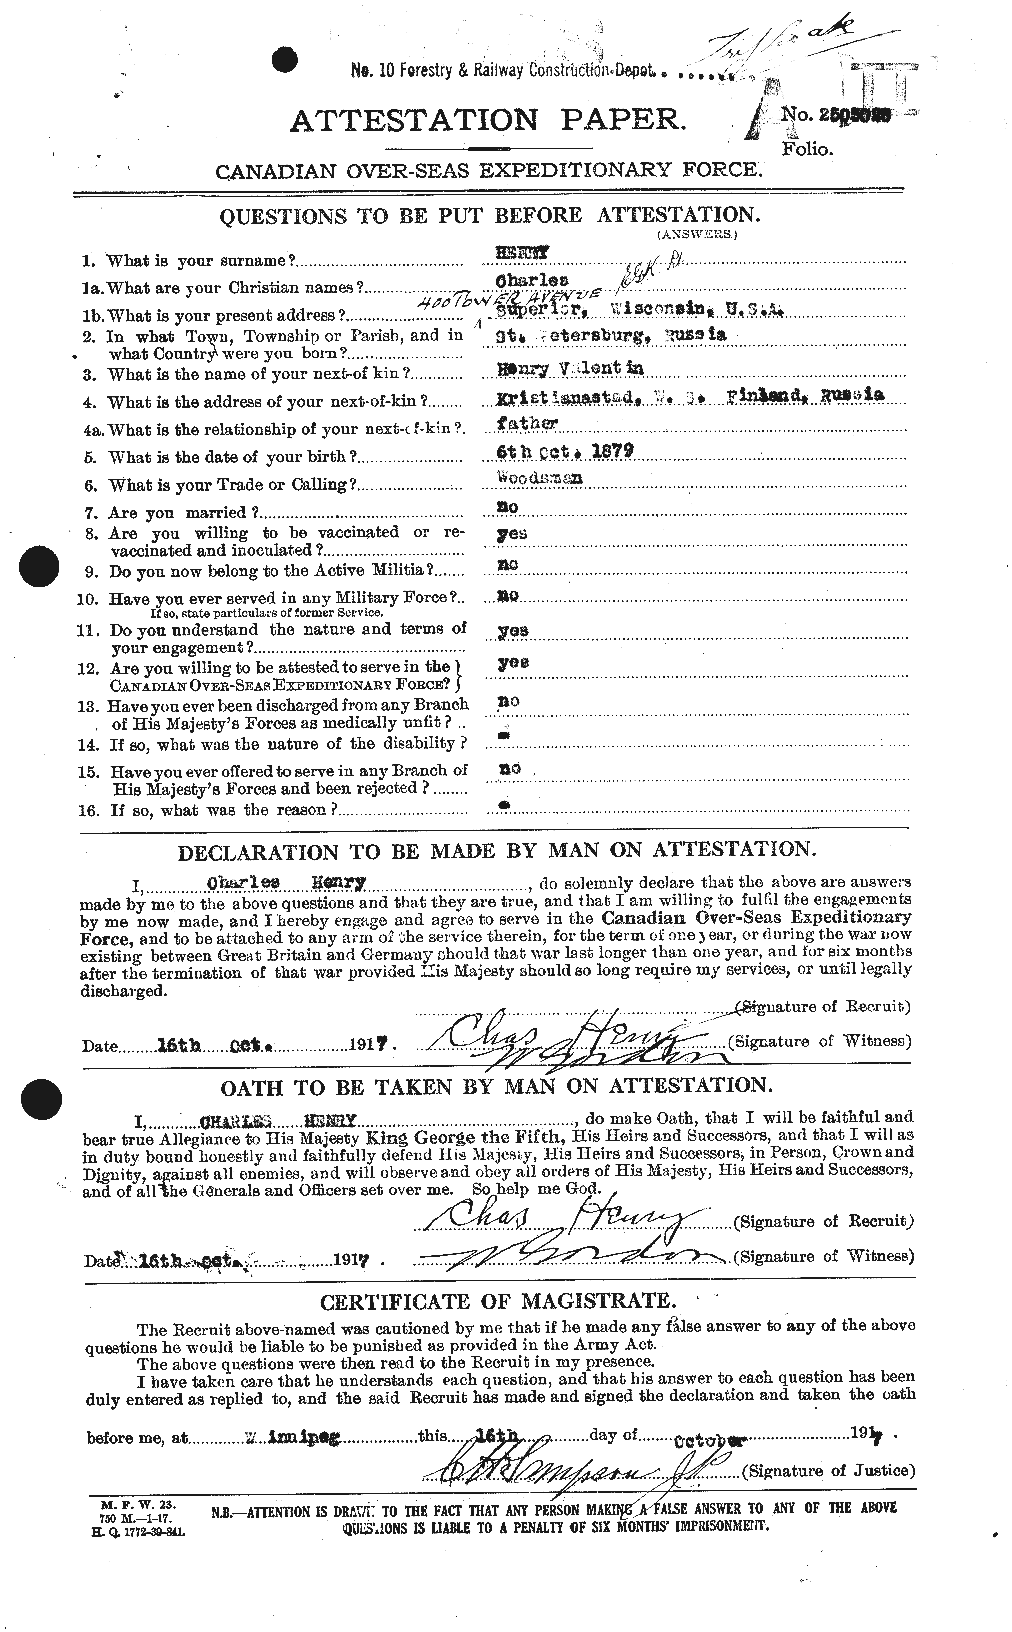 Personnel Records of the First World War - CEF 392805a